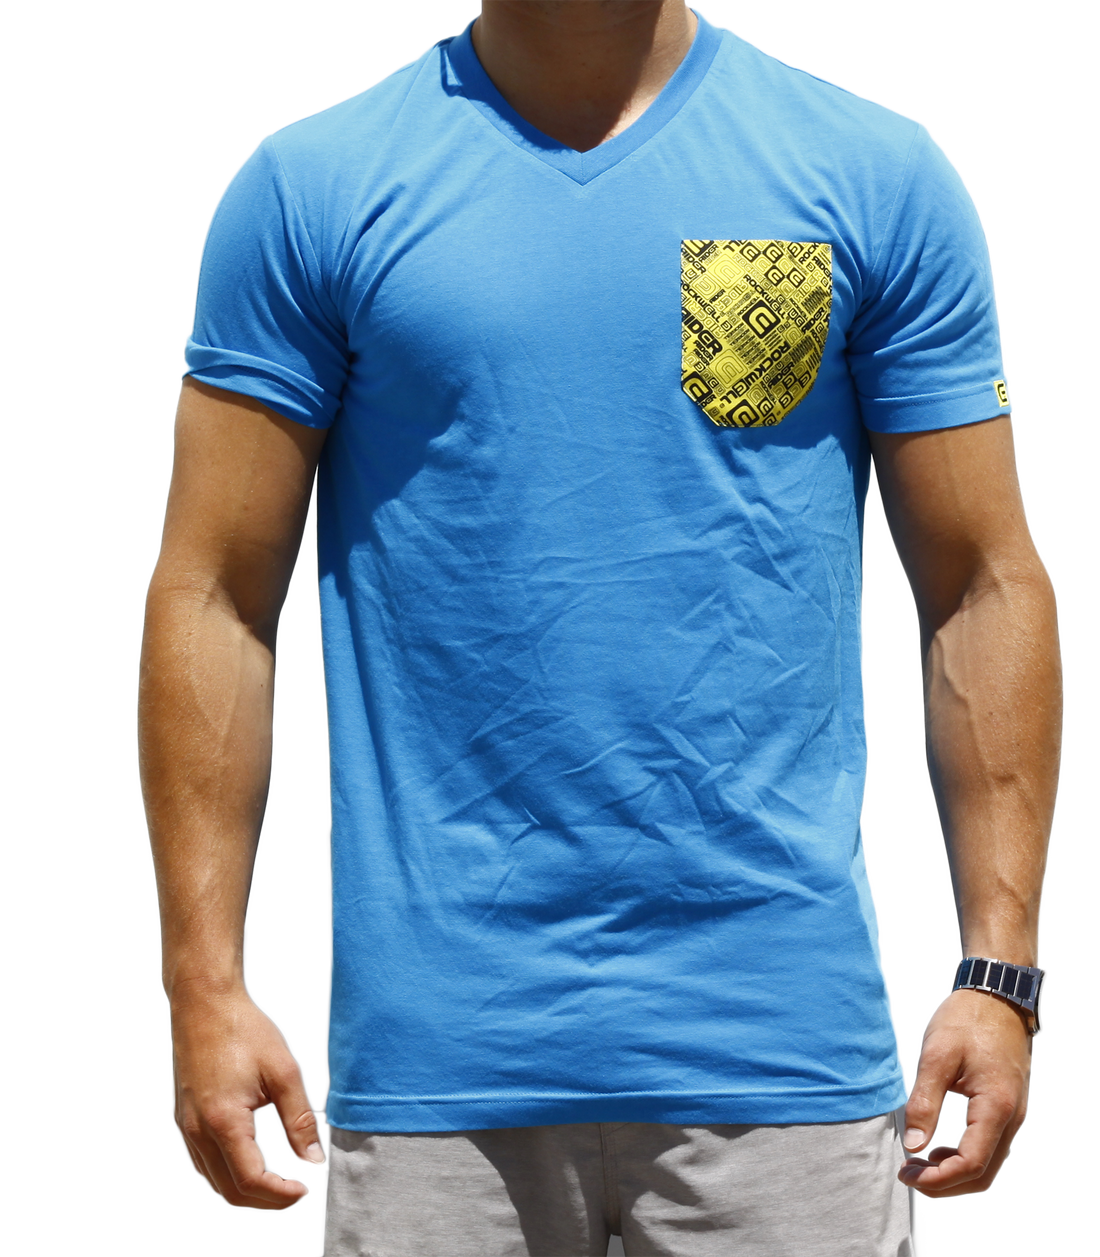 Man wearing the blue boss v neck with yellow chest pocket with Rockwell logo on it